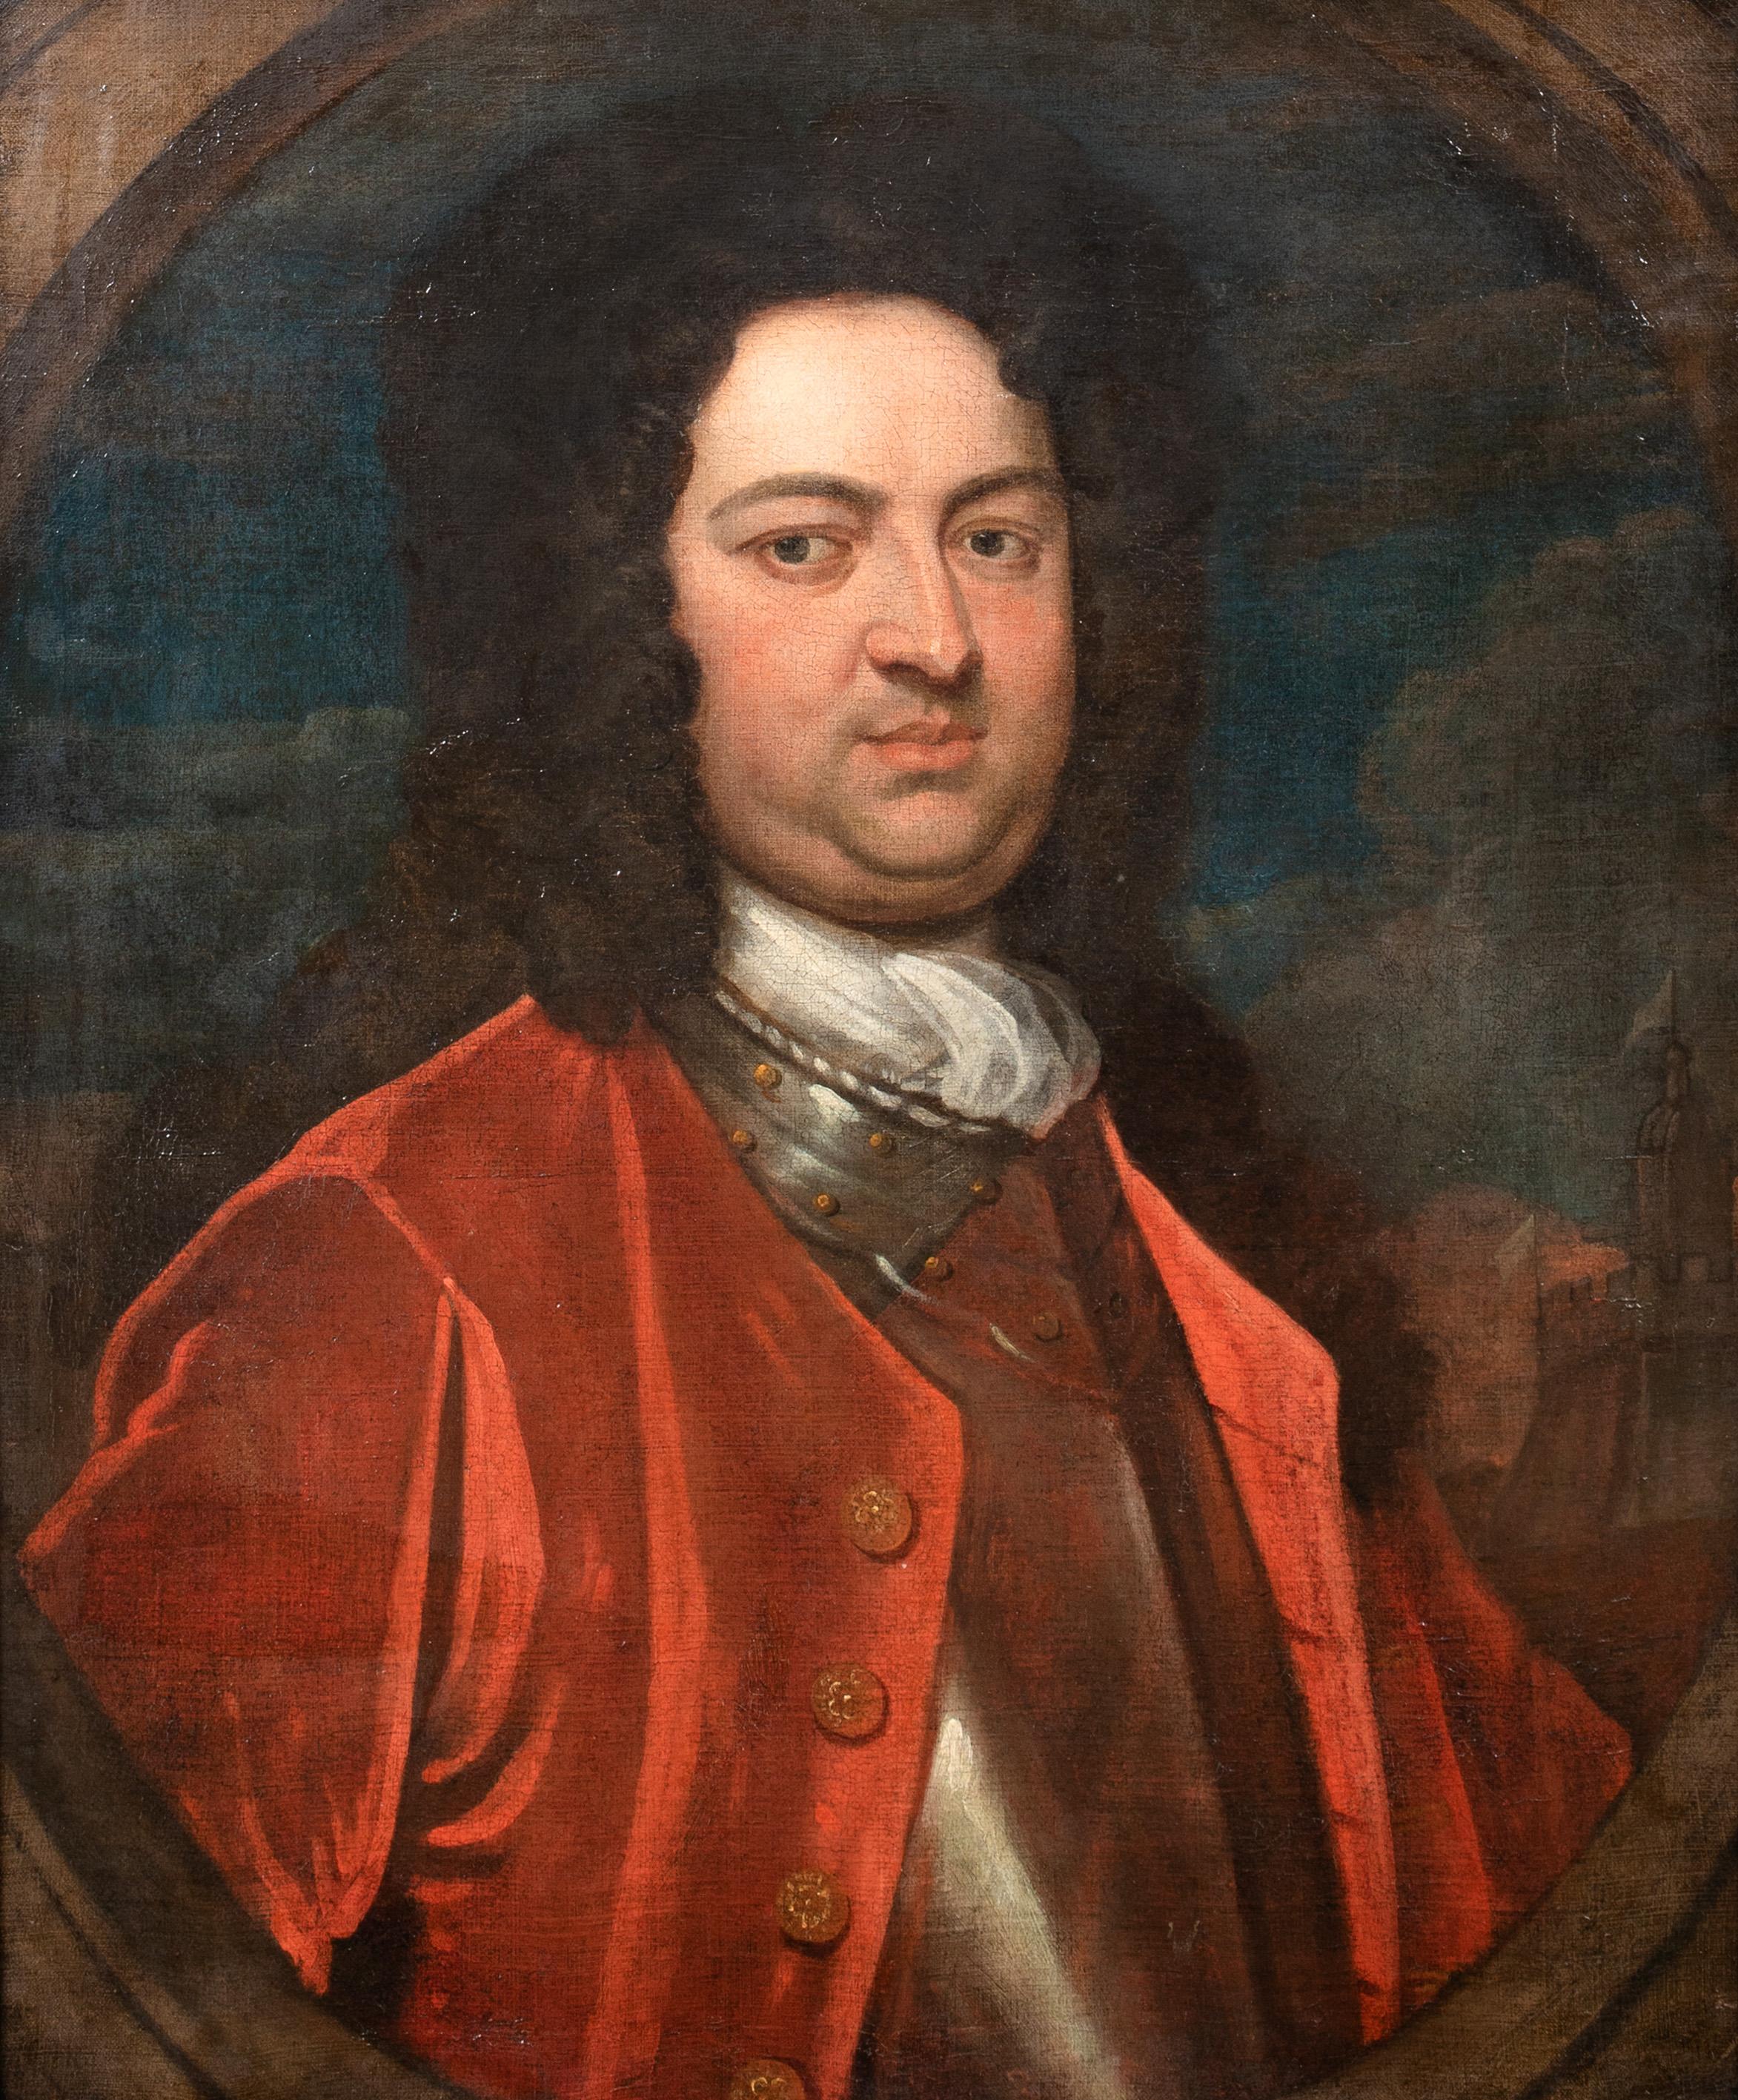 Sir Godfrey Kneller Portrait Painting - Portrait Of A Senior British Military Officer, Identified as Charles Sackville, 